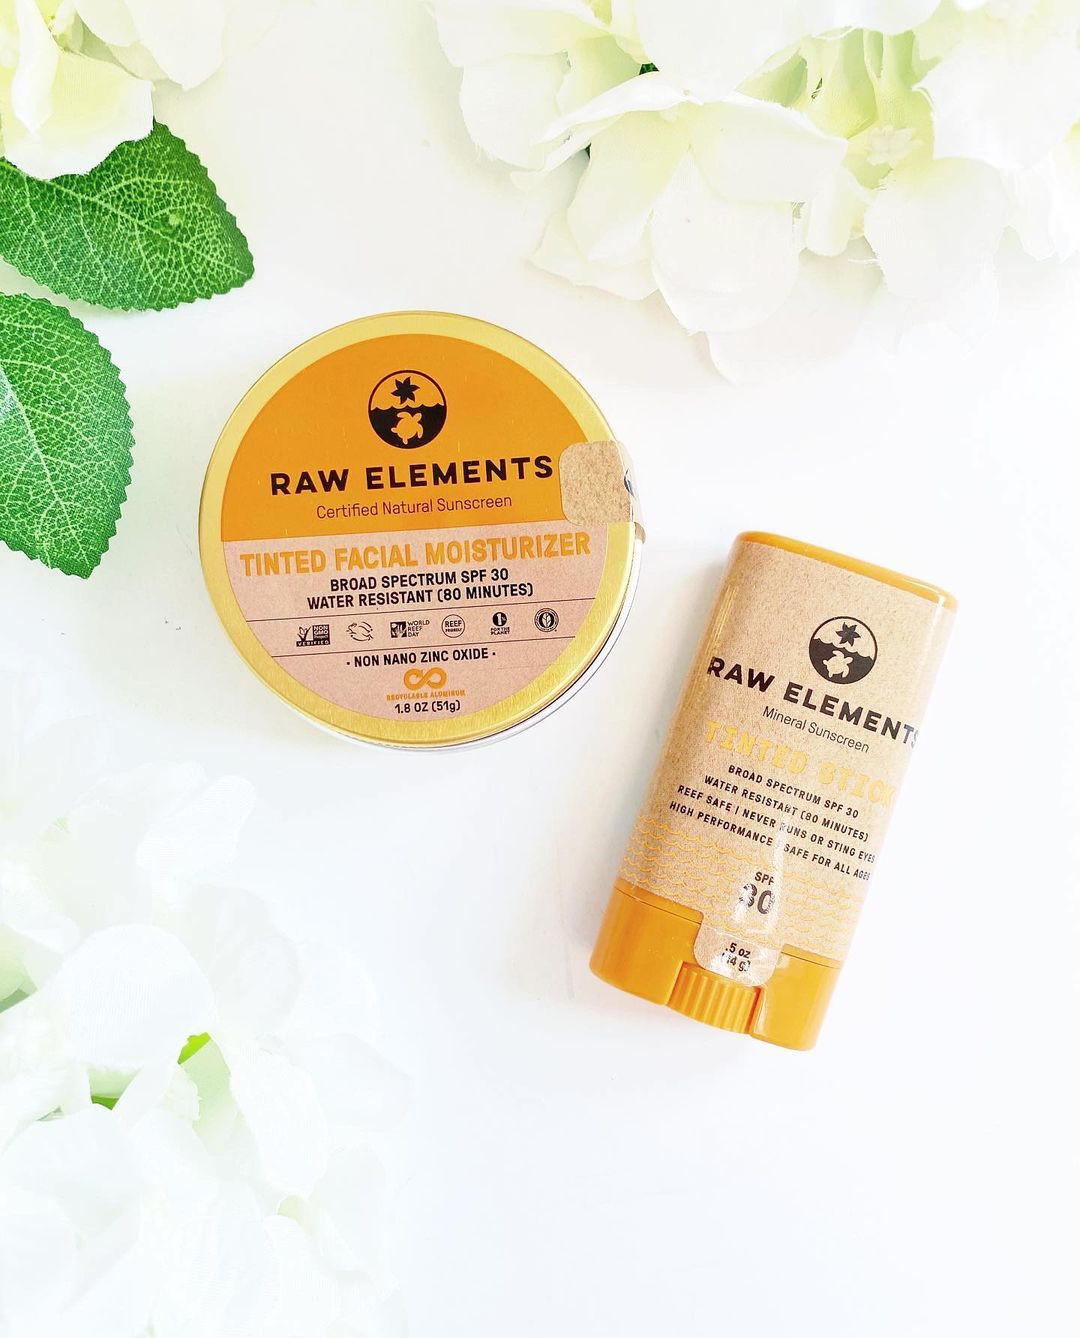 Raw Elements Organic Tinted Sunscreen review and 10% off promo code